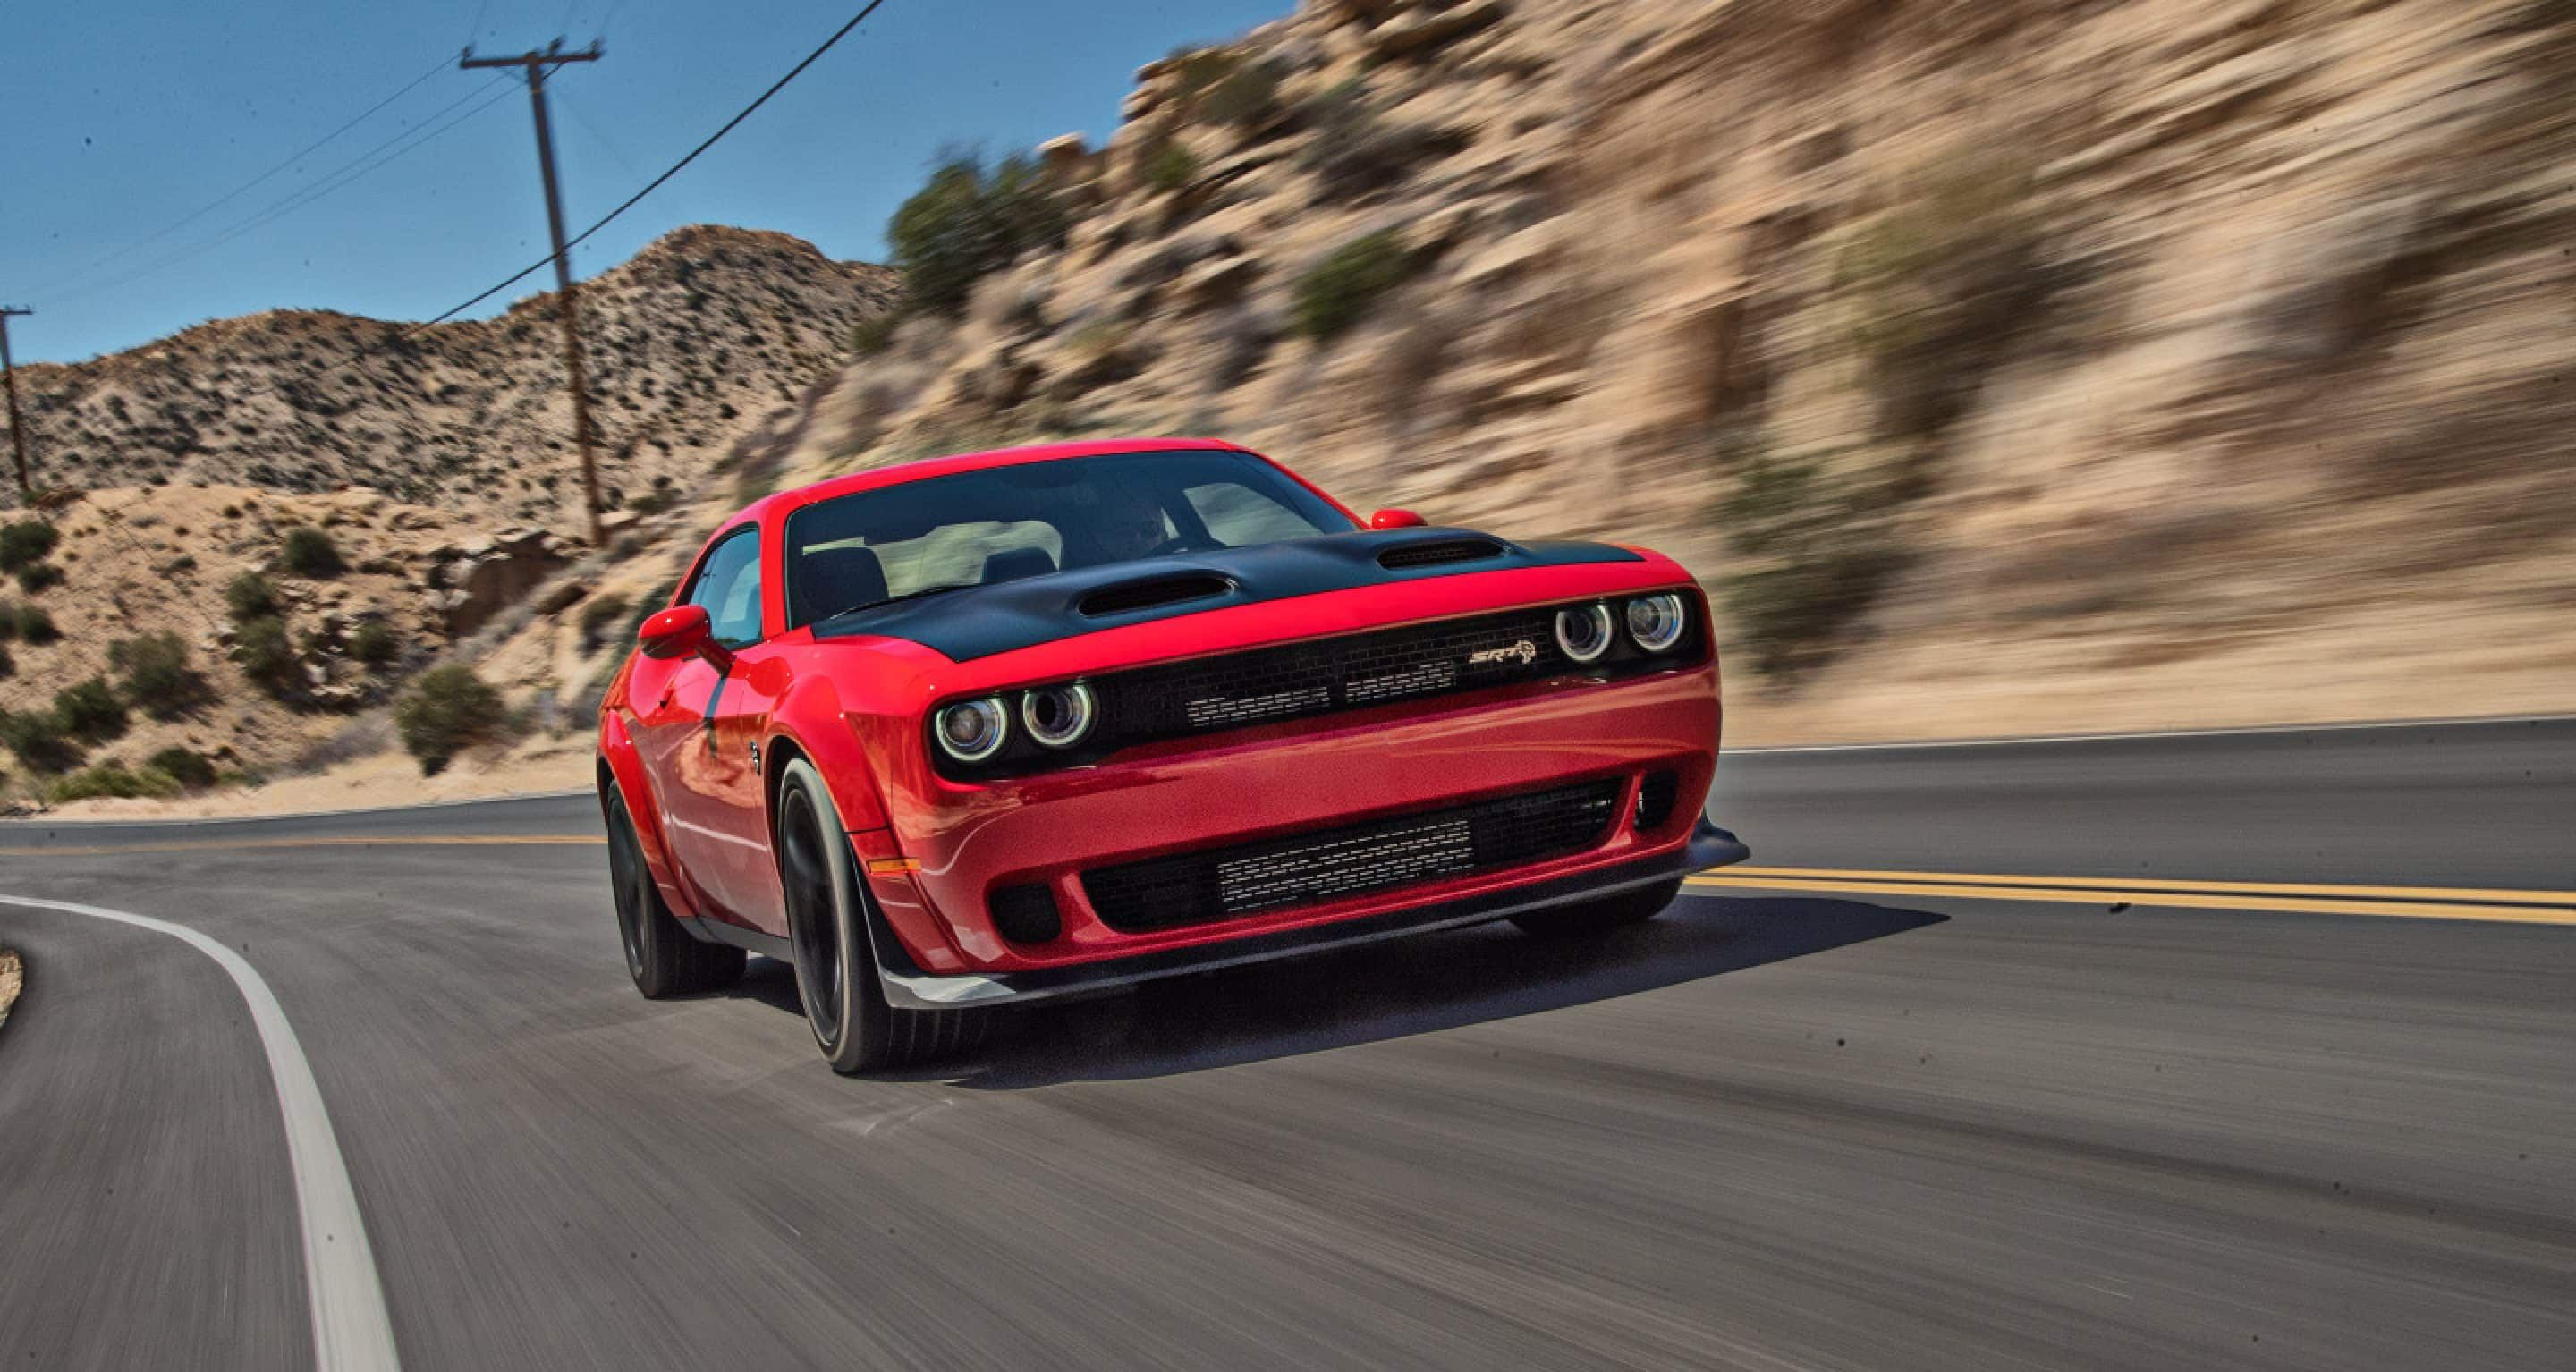 The 2022 Dodge Challenger SRT Hellcat Redeye Widebody on the road. 